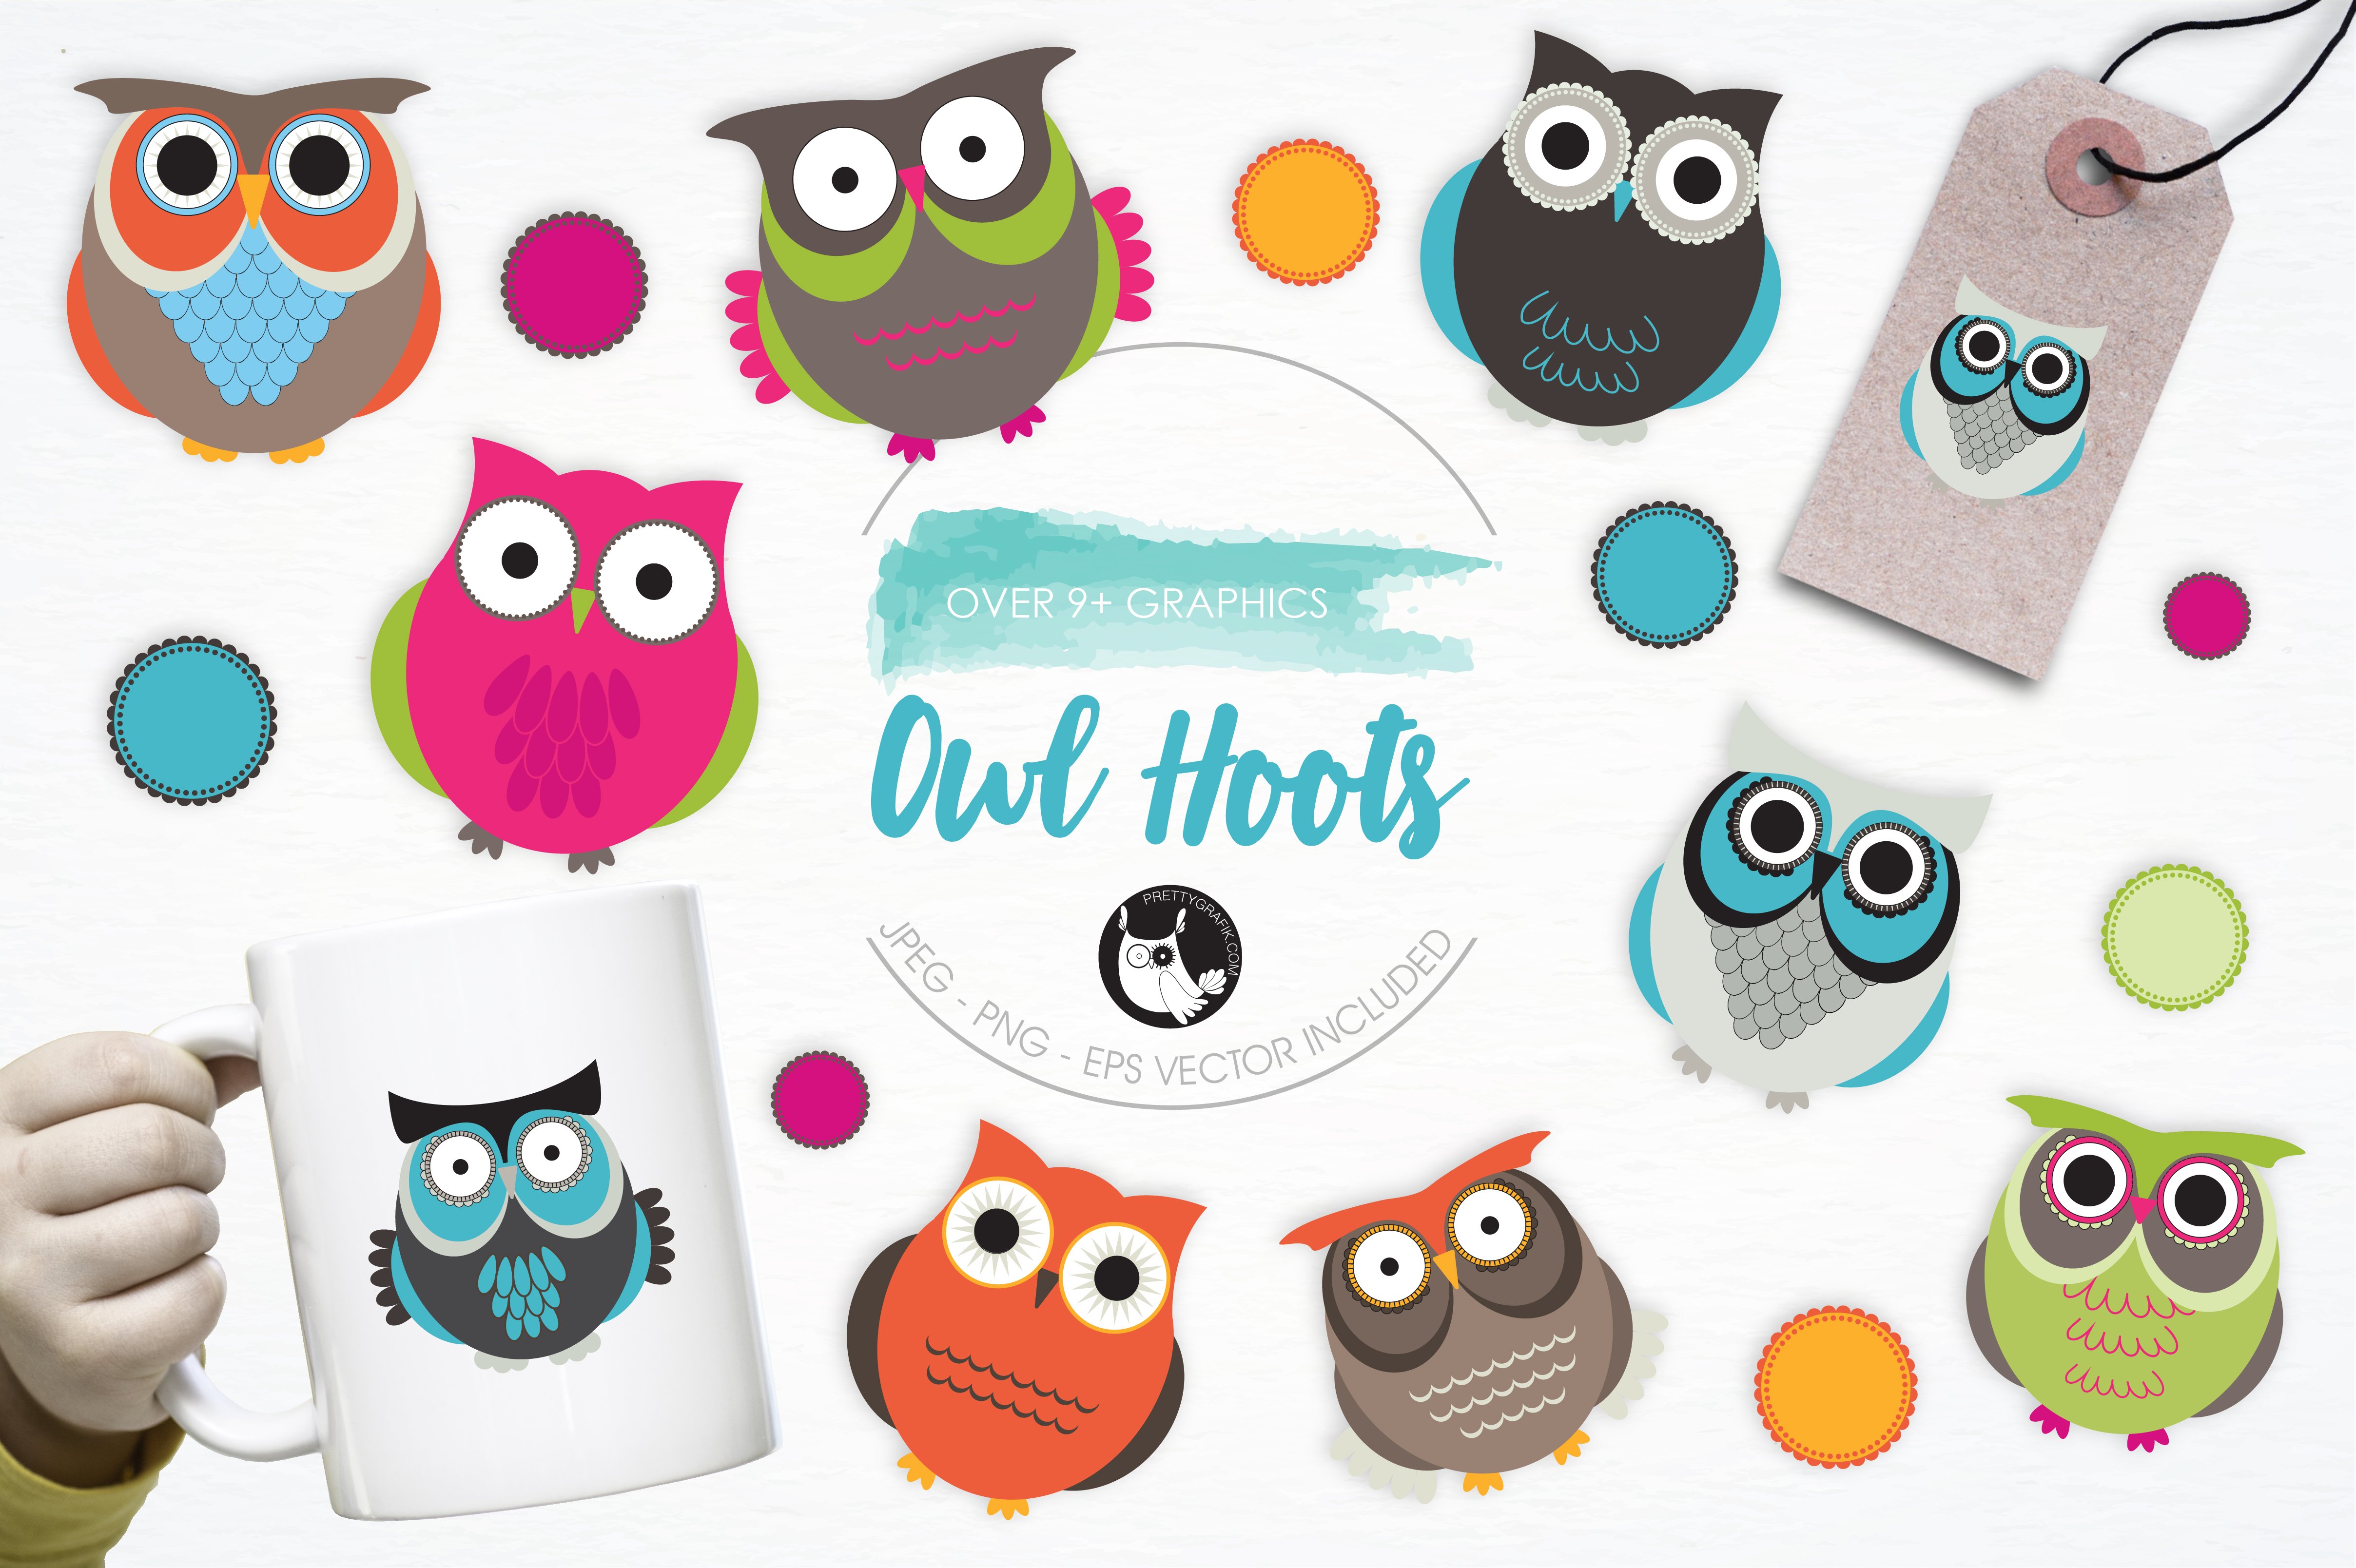 Owl Hoots illustration pack - Vector Image